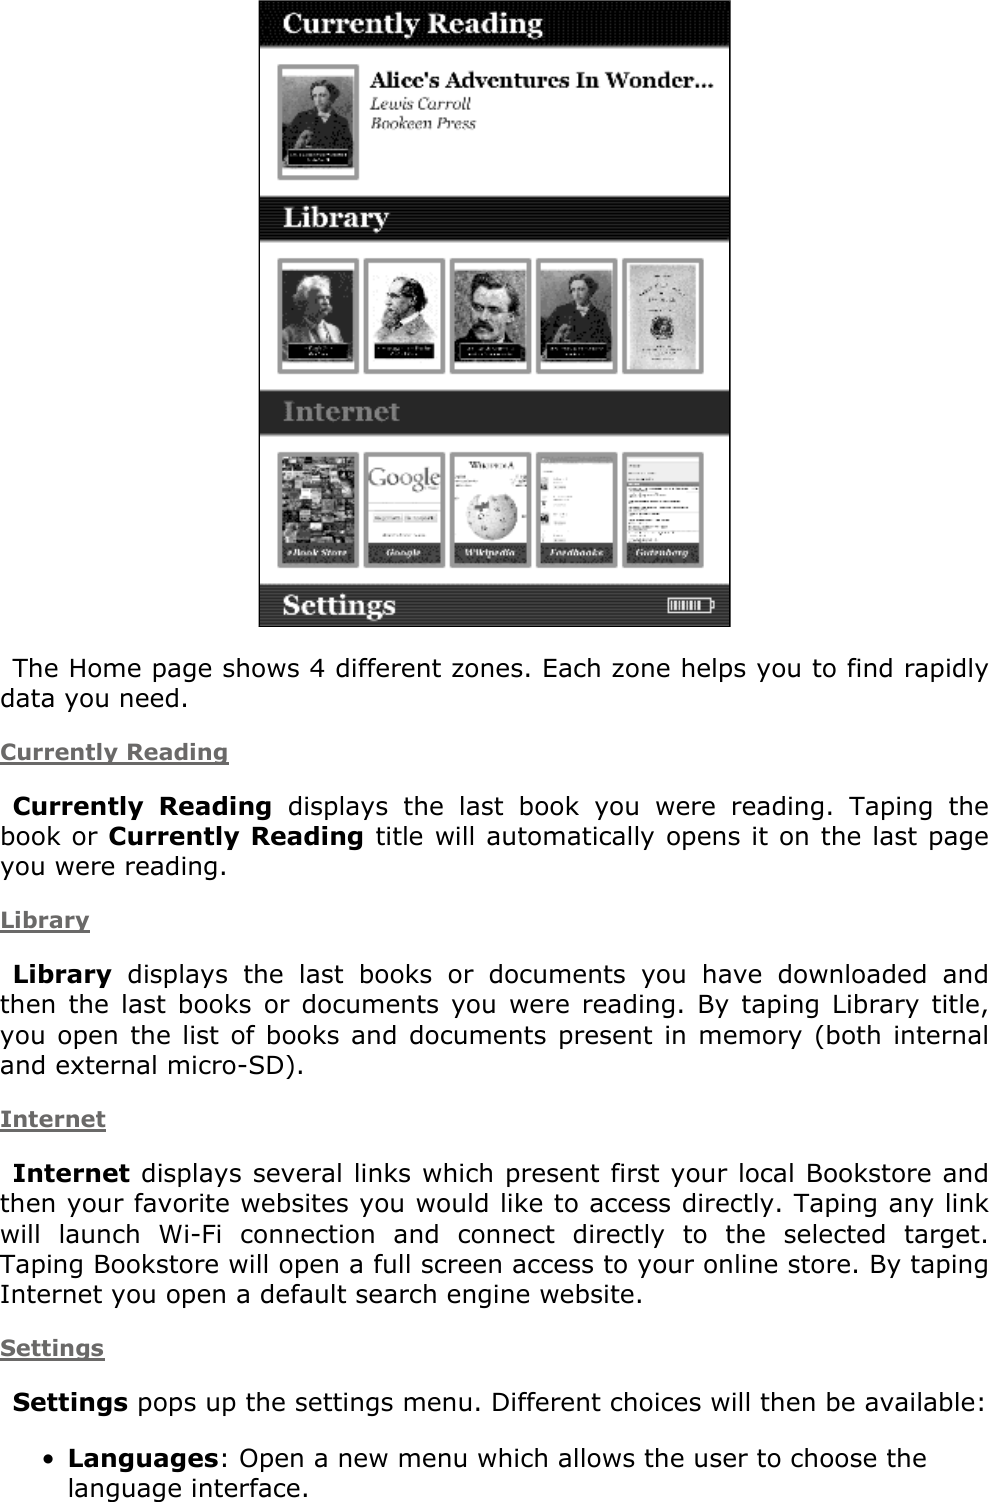  The Home page shows 4 different zones. Each zone helps you to find rapidly data you need. Currently ReadingCurrently  Reading  displays  the  last  book  you  were  reading.  Taping  the book or Currently Reading title will automatically opens it on the last page you were reading. LibraryLibrary  displays  the  last  books  or  documents  you  have  downloaded  and then  the  last  books  or documents  you  were reading.  By  taping  Library  title, you open the list  of  books and documents present  in memory  (both internal and external micro-SD).InternetInternet displays several links which present first your local Bookstore and then your favorite websites you would like to access directly. Taping any link will  launch  Wi-Fi  connection  and  connect  directly  to  the  selected  target. Taping Bookstore will open a full screen access to your online store. By taping Internet you open a default search engine website.SettingsSettings pops up the settings menu. Different choices will then be available:Languages: Open a new menu which allows the user to choose the language interface.•